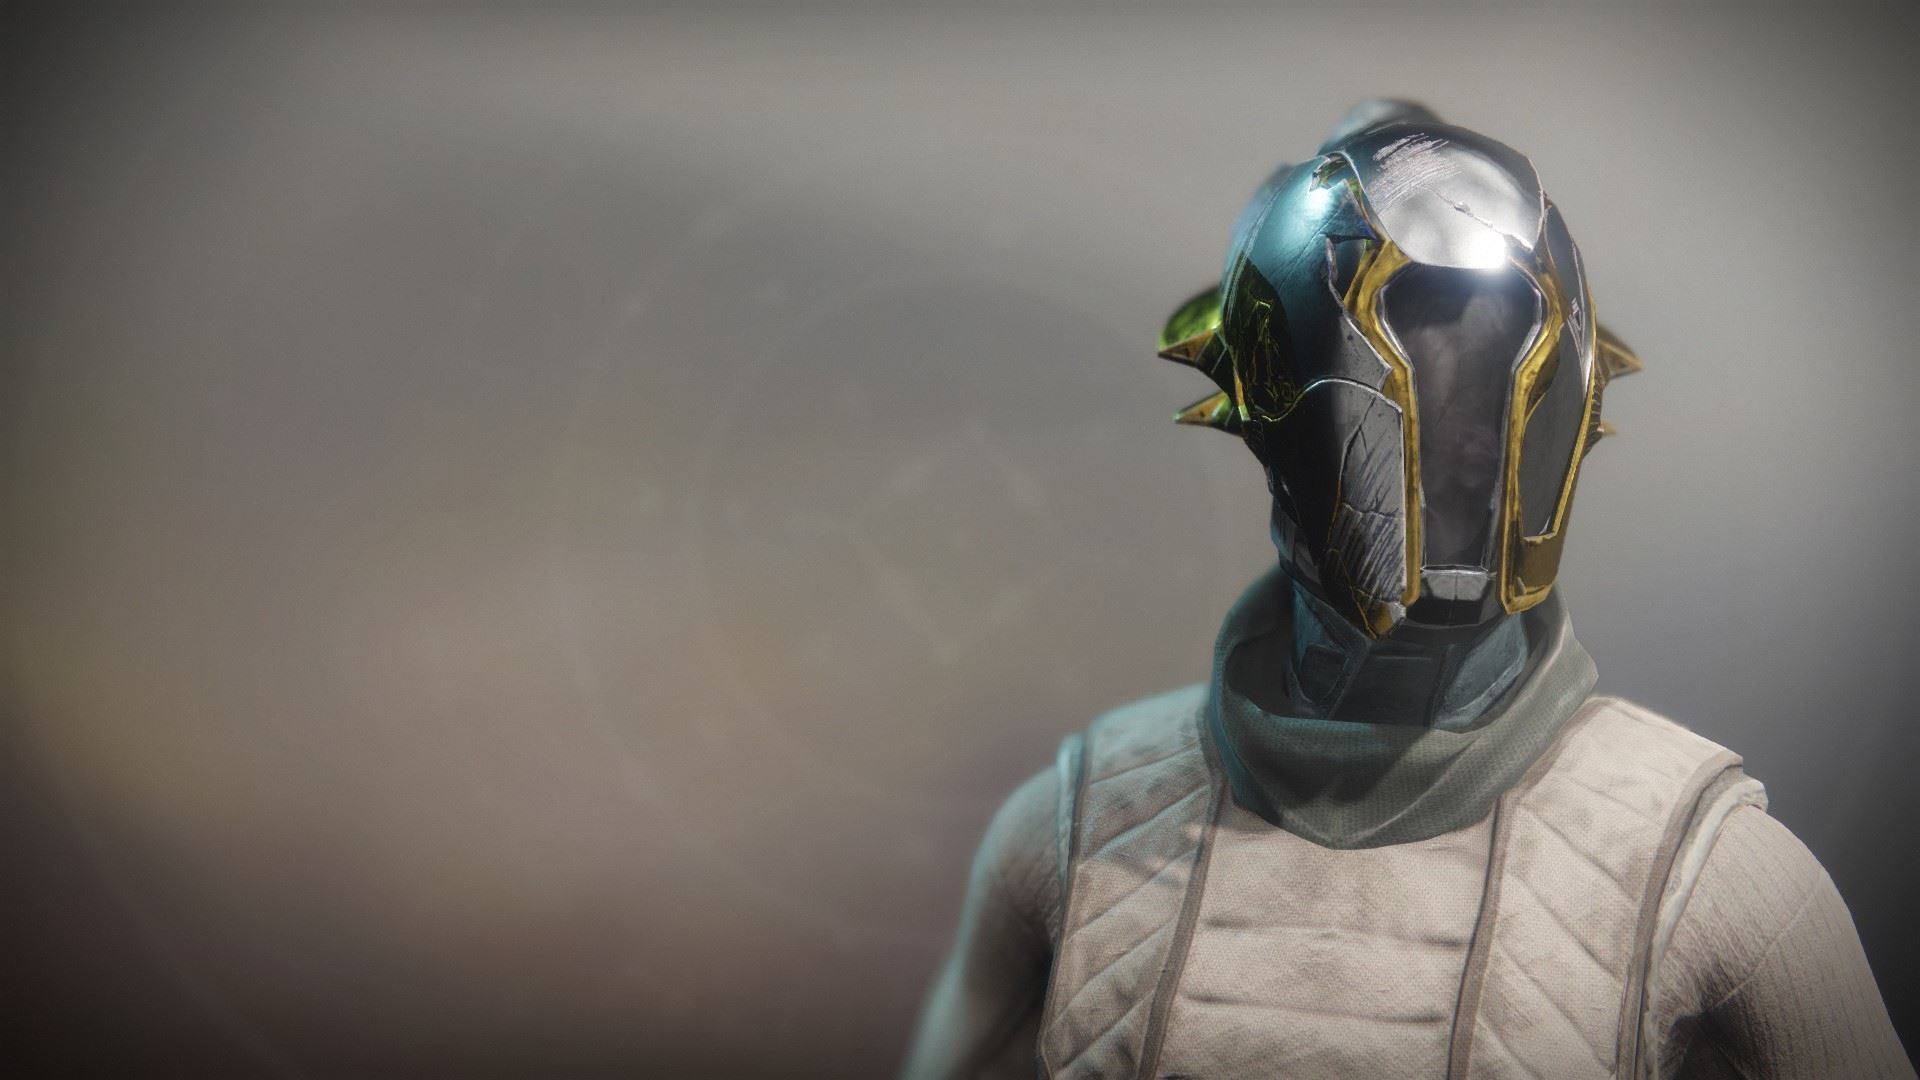 An in-game render of the Solstice Hood (Scorched).